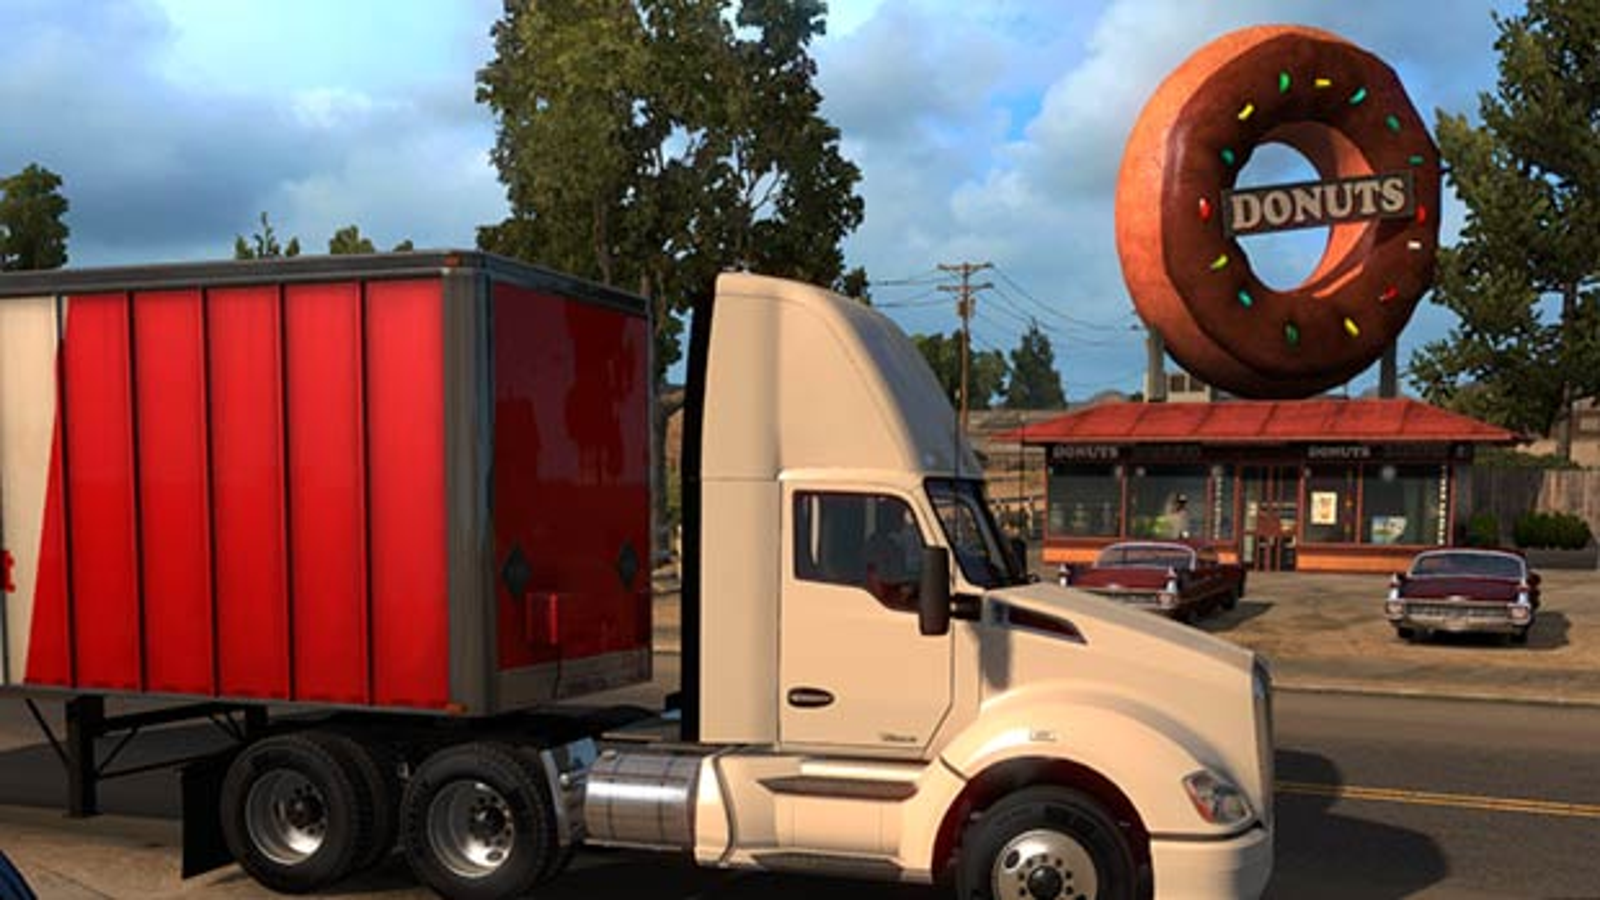 Euro Truck Simulator 2 is quietly one of the best open world games on PC